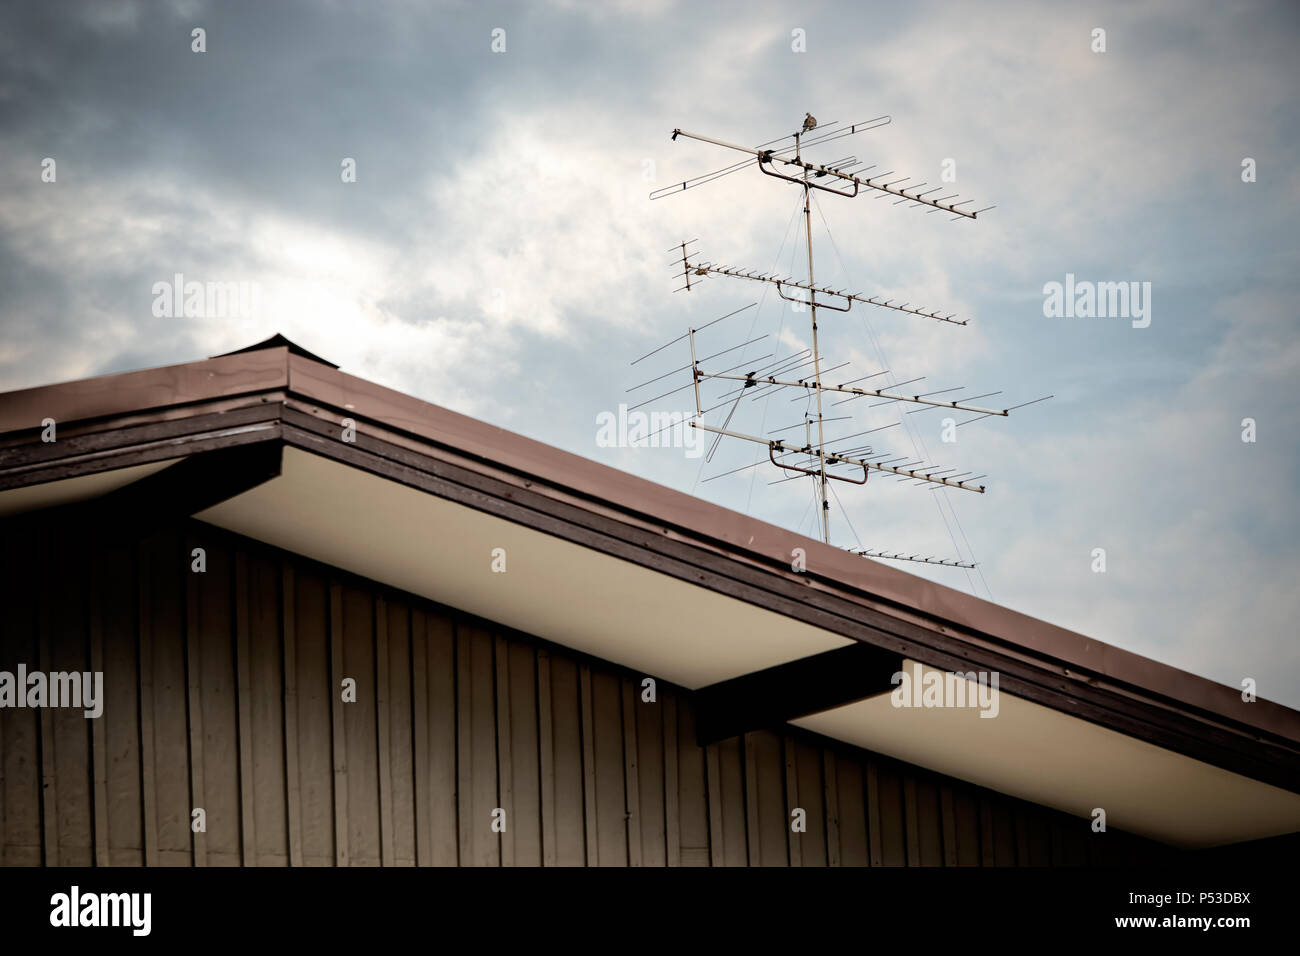 Close Up Classic Old Tv Antenna On House Roof Over Cloudy Sky Stock Photo Alamy